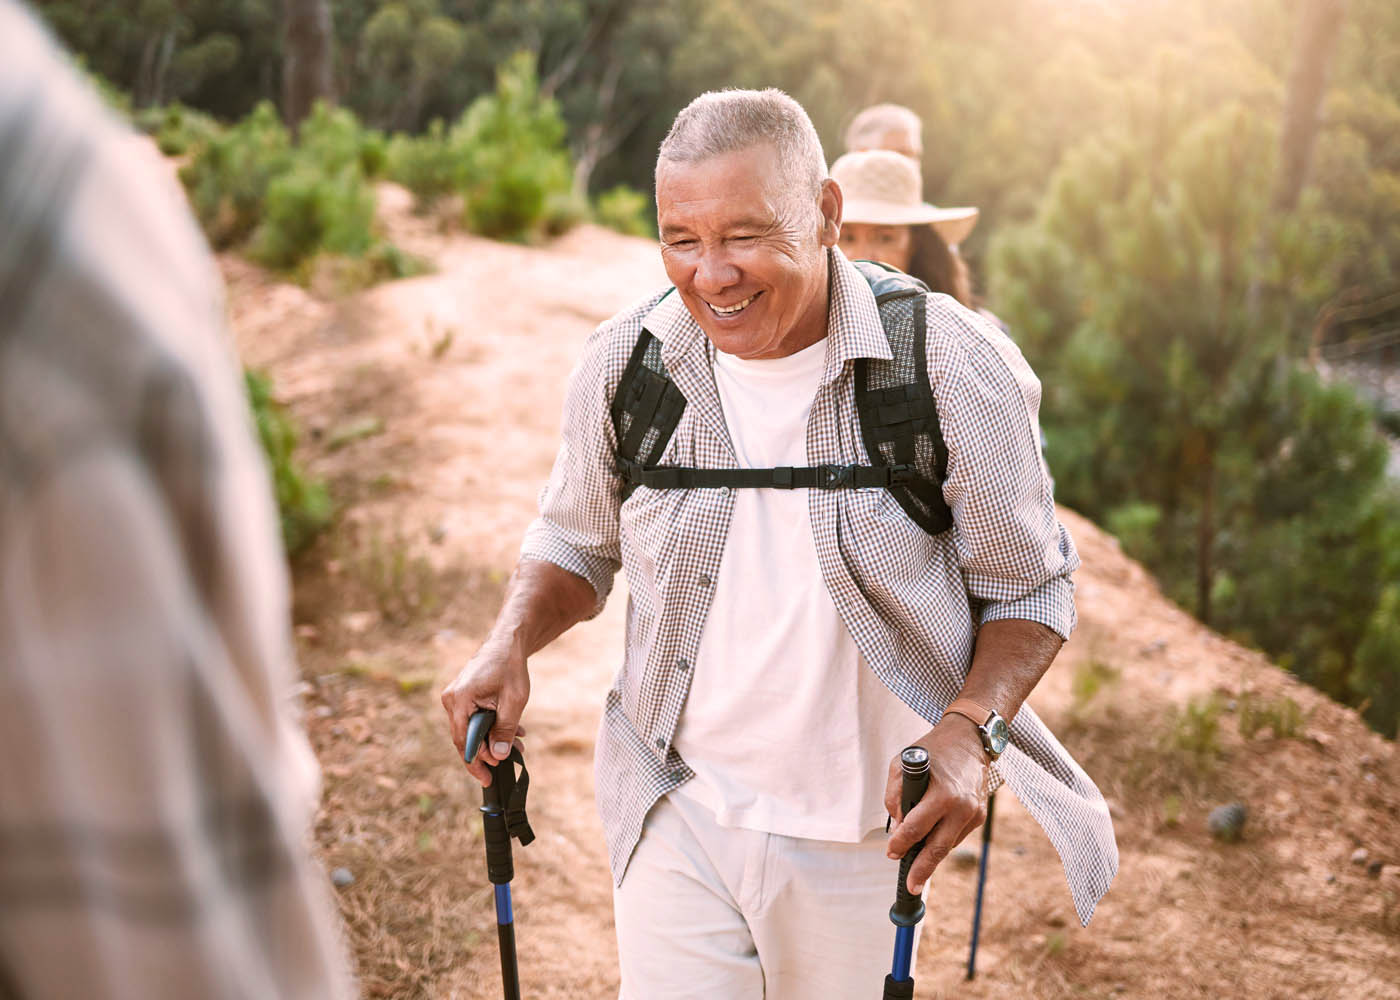 A man hiking with his wife free of pain after visiting Light Lounge's chronic pain treatment center.